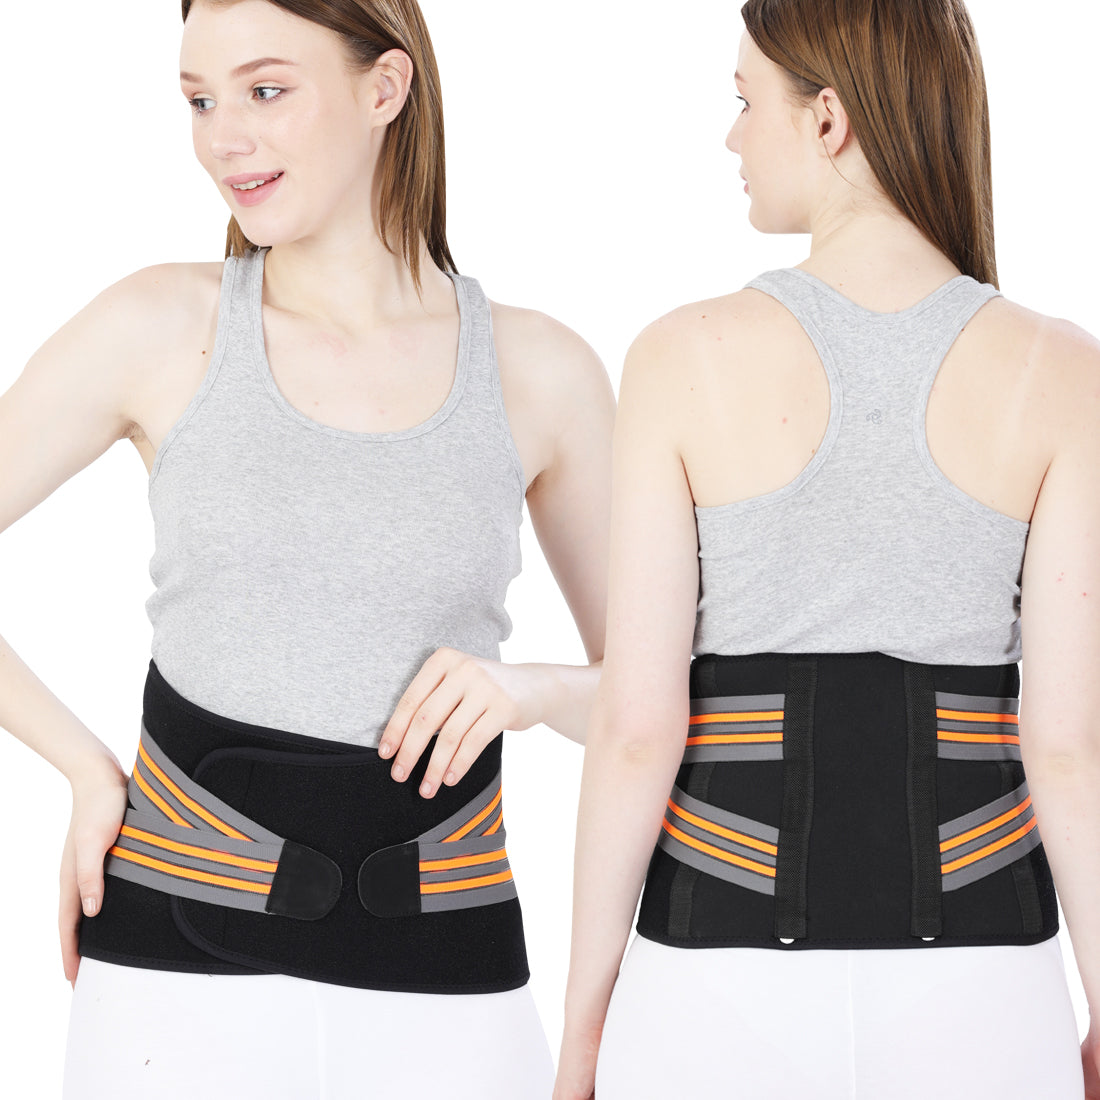 Back Support Belts - Benefits & Types Of Supports For Back Pain